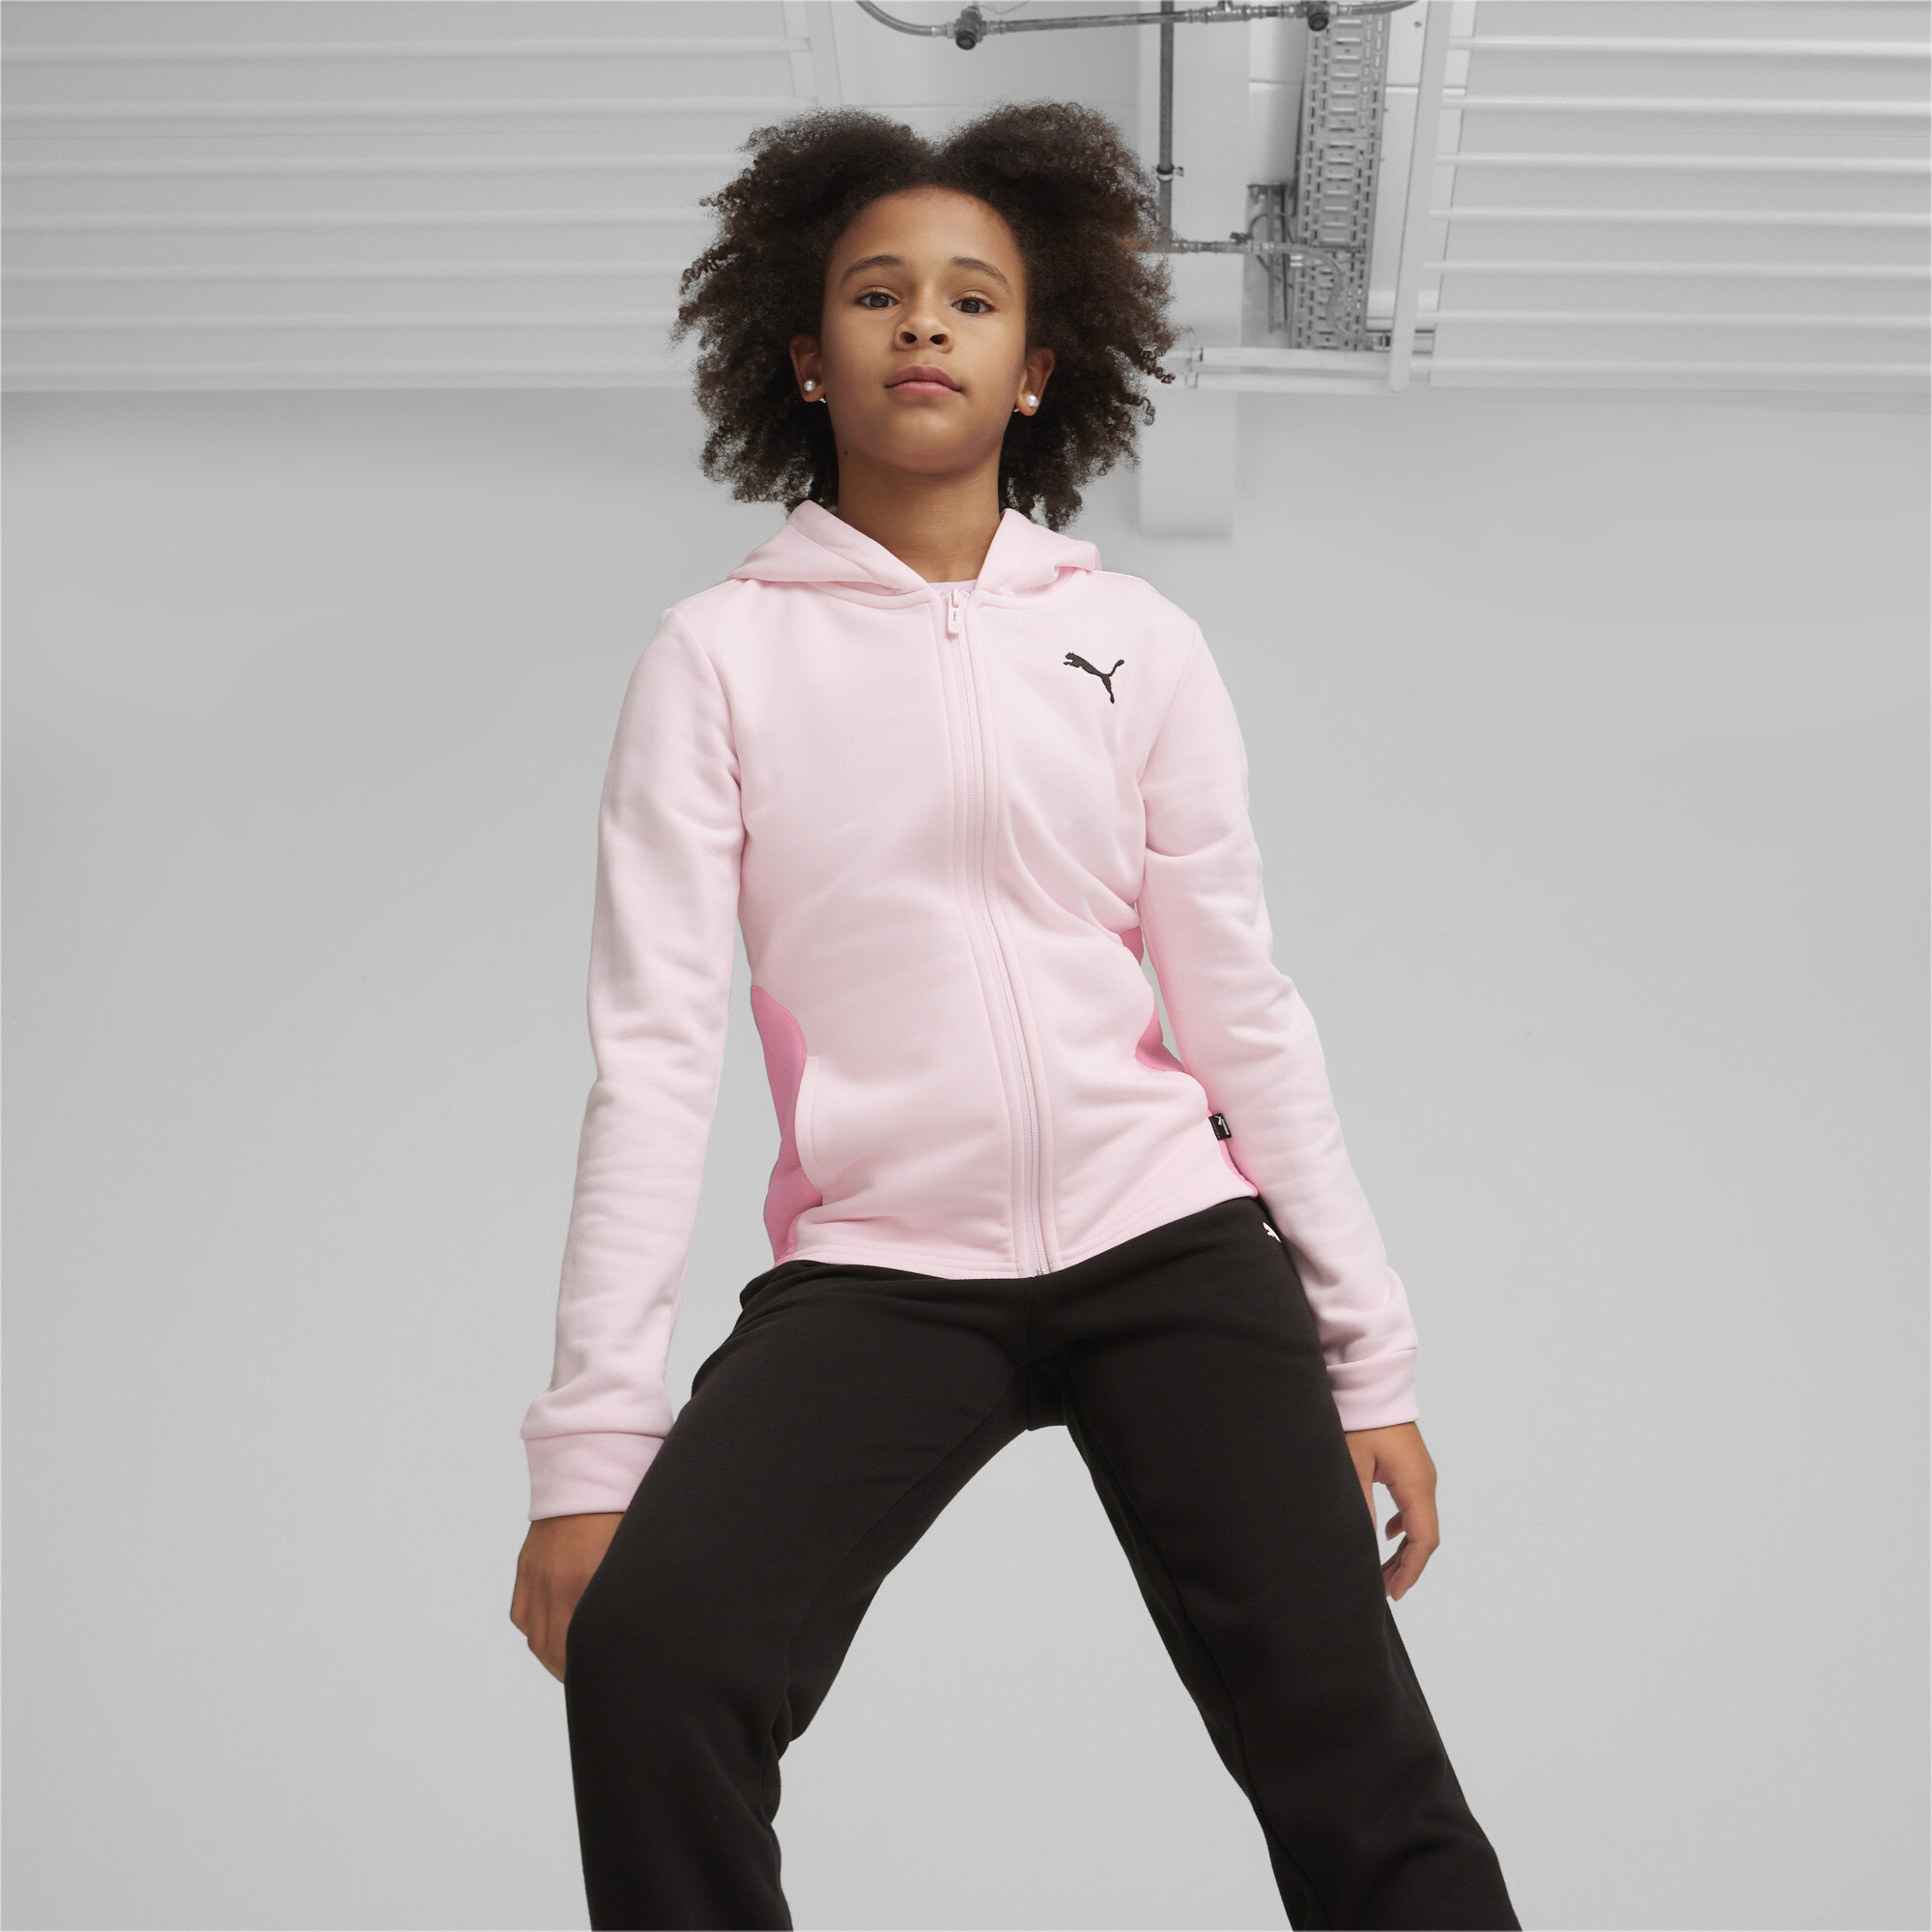 Women's Puma Hooded Sweatsuit Youth, Pink, Size 4-5Y, Clothing